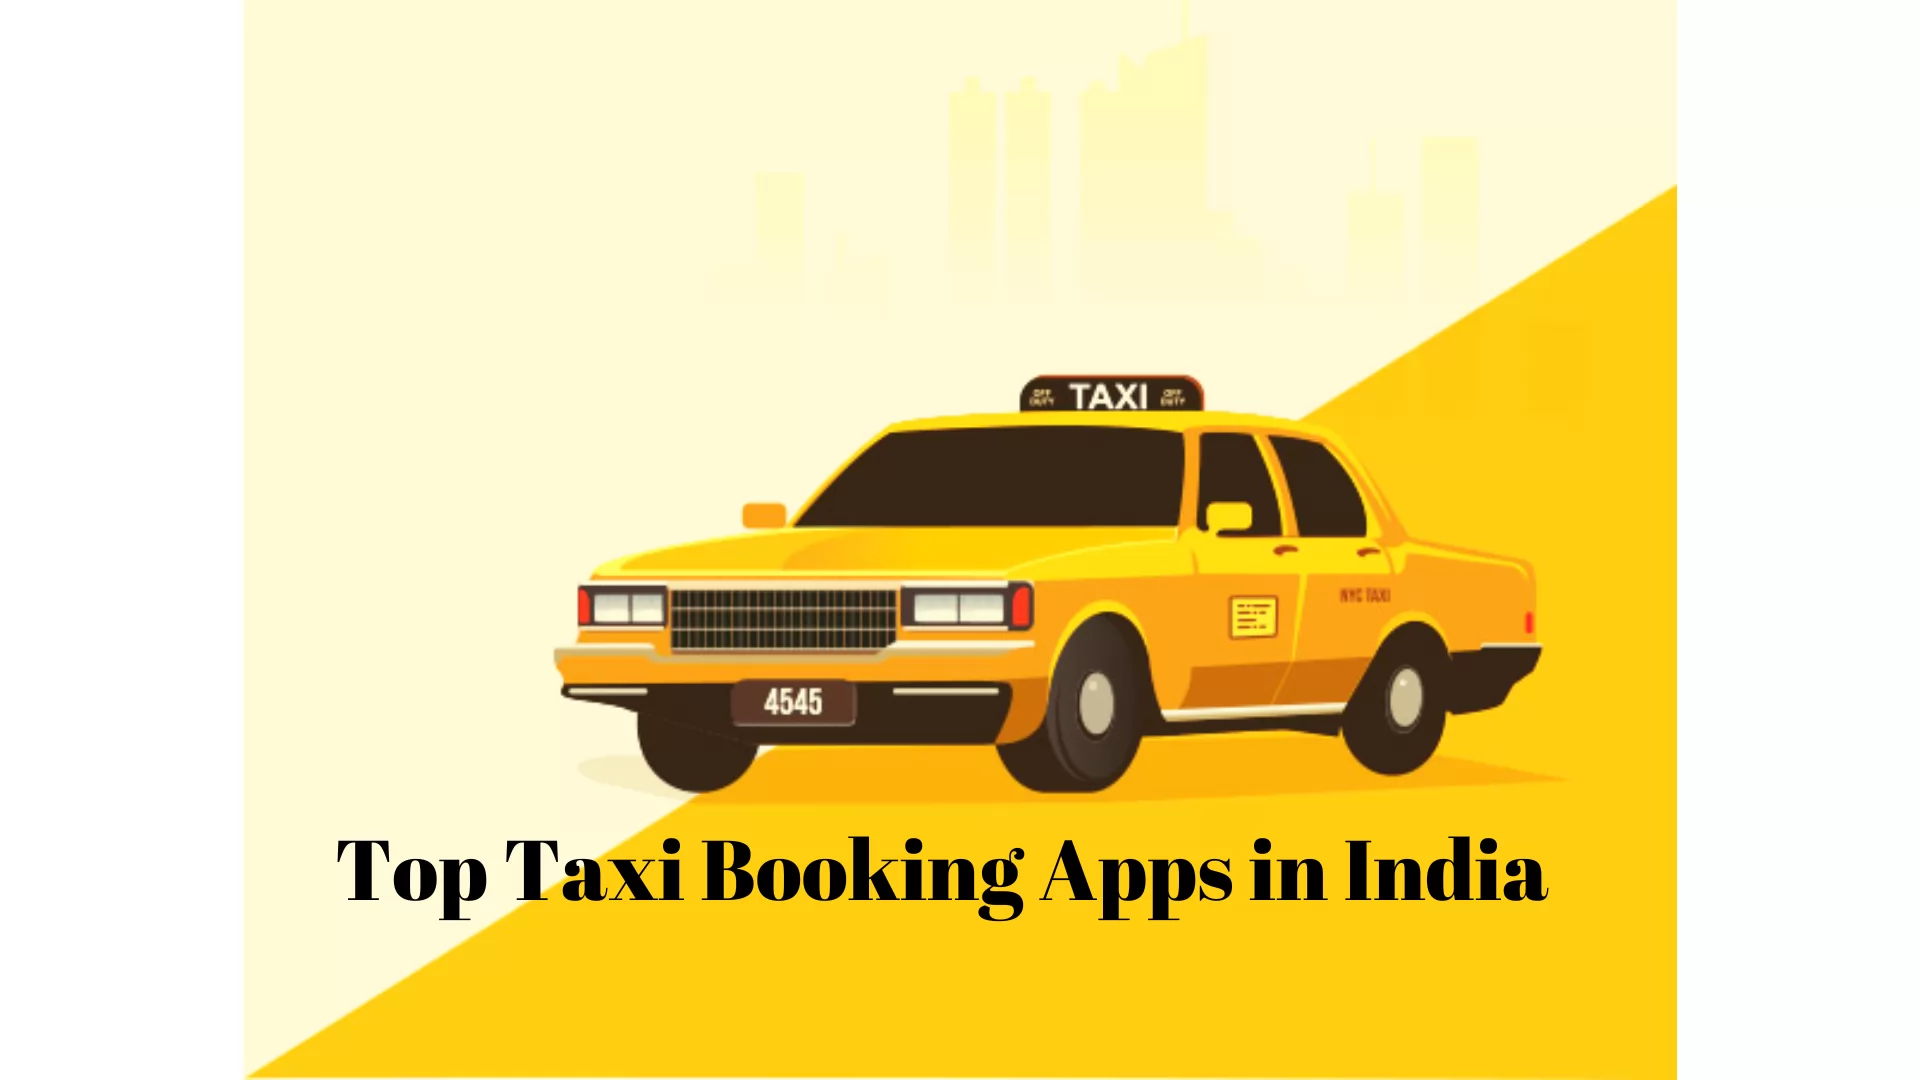 Top Taxi Booking Apps in India